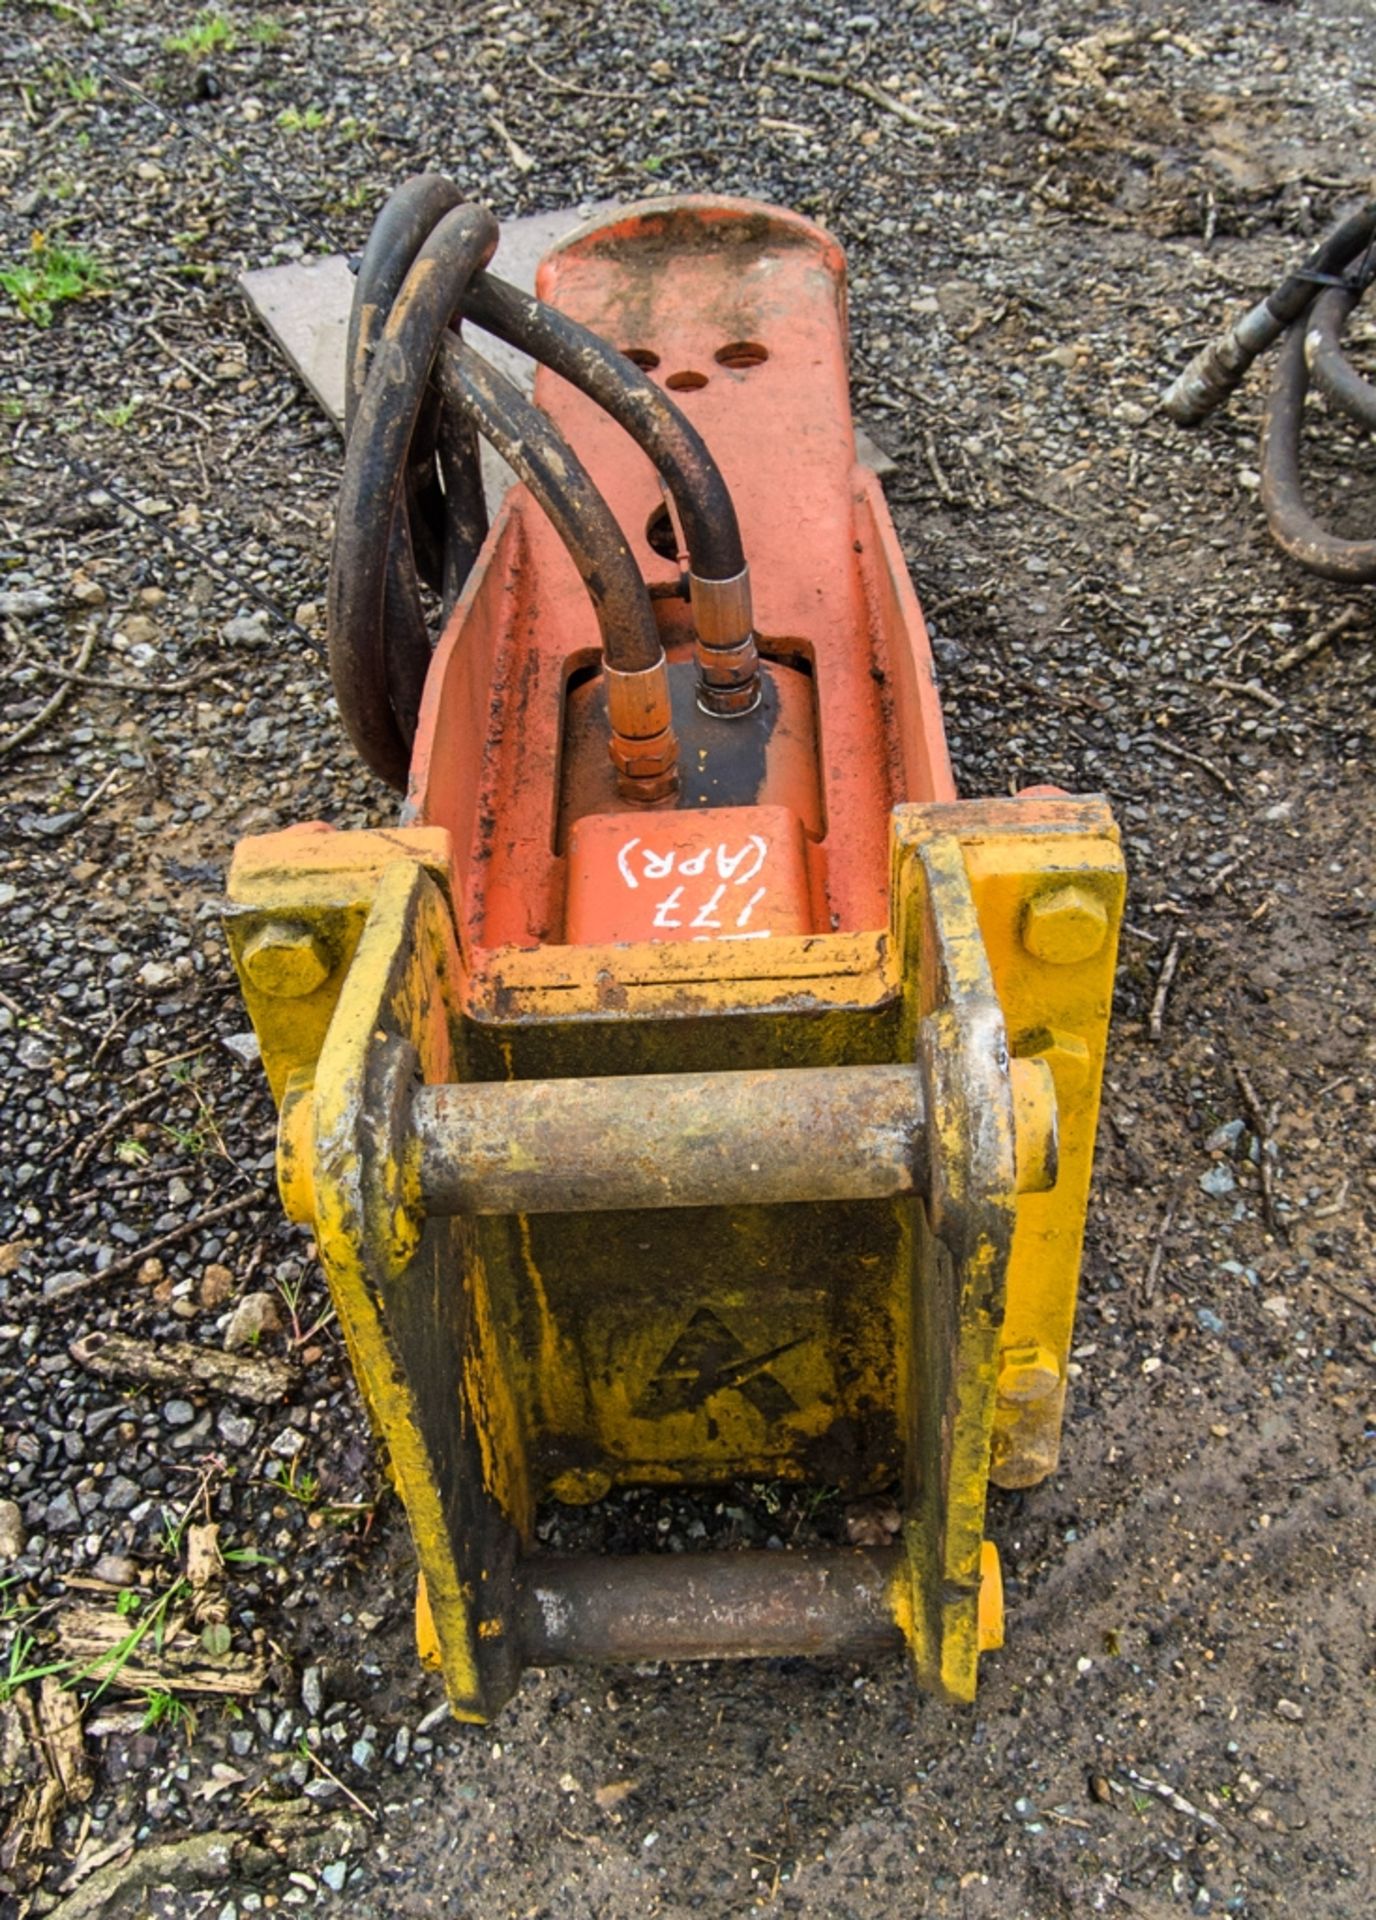 Indeco hydraulic breaker to suit excavator Pin diameter: 45mm Pin centres: 300mm Pin width: 180mm - Image 3 of 4